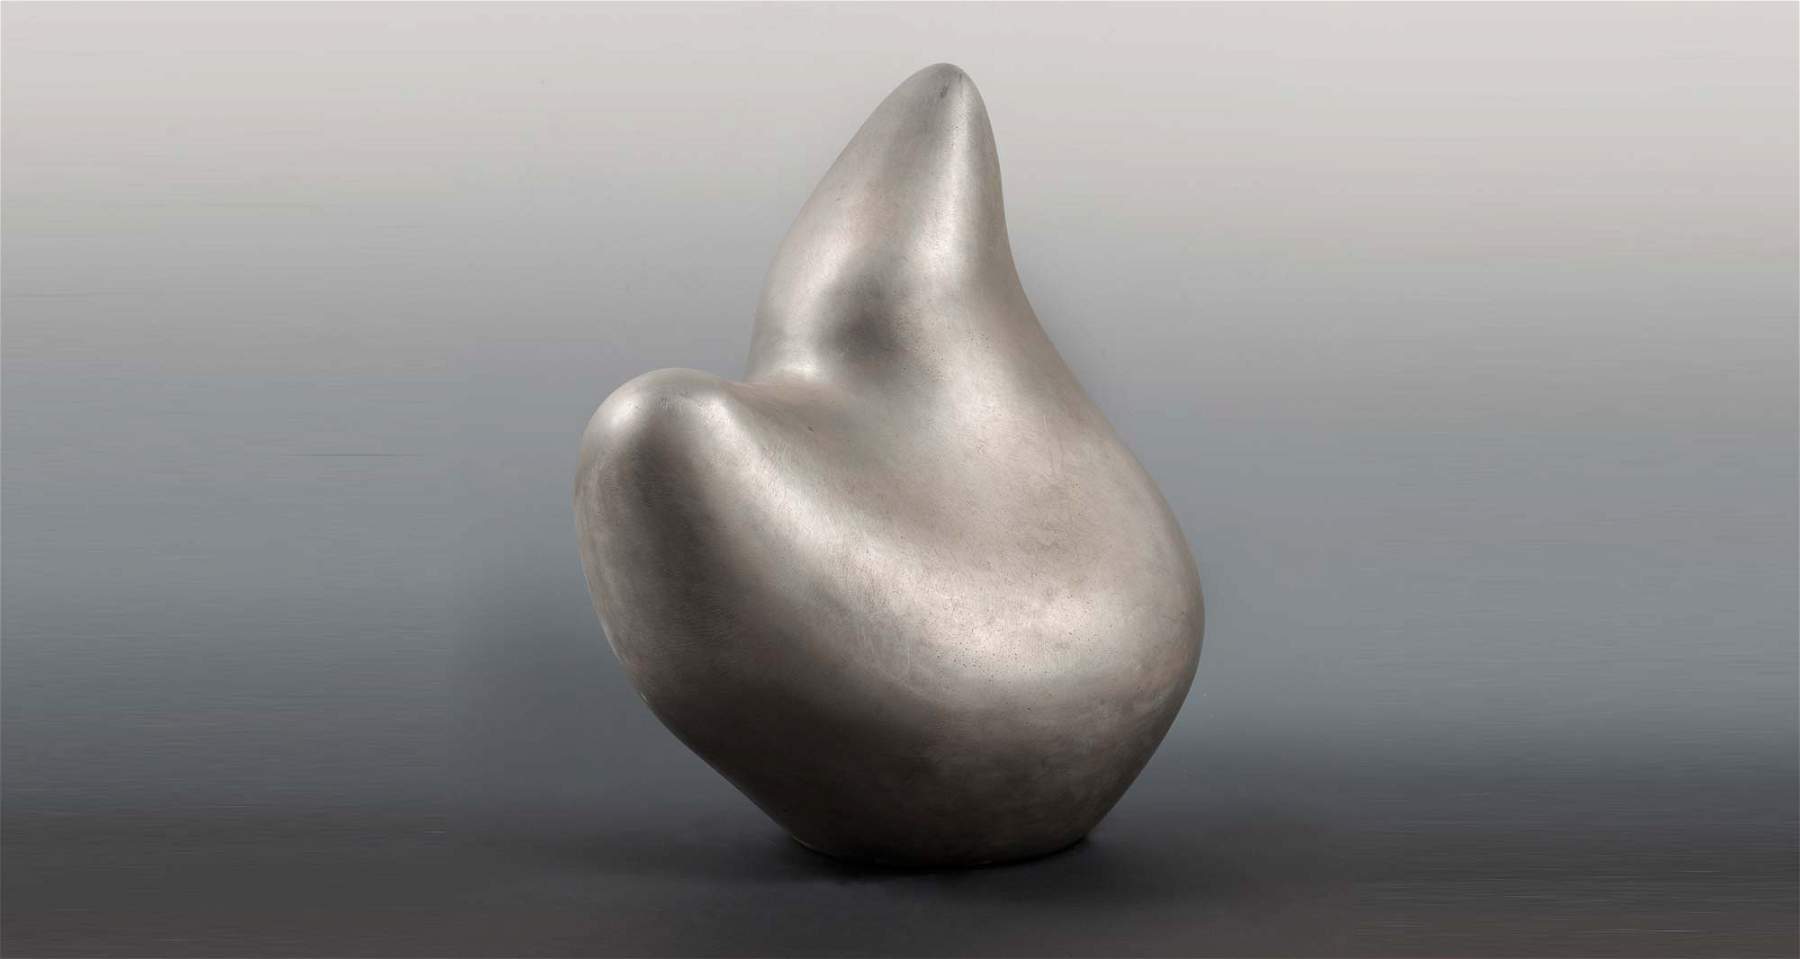 A Hans Arp work that had been lost track of resurfaces in Florence. And now it is being exhibited